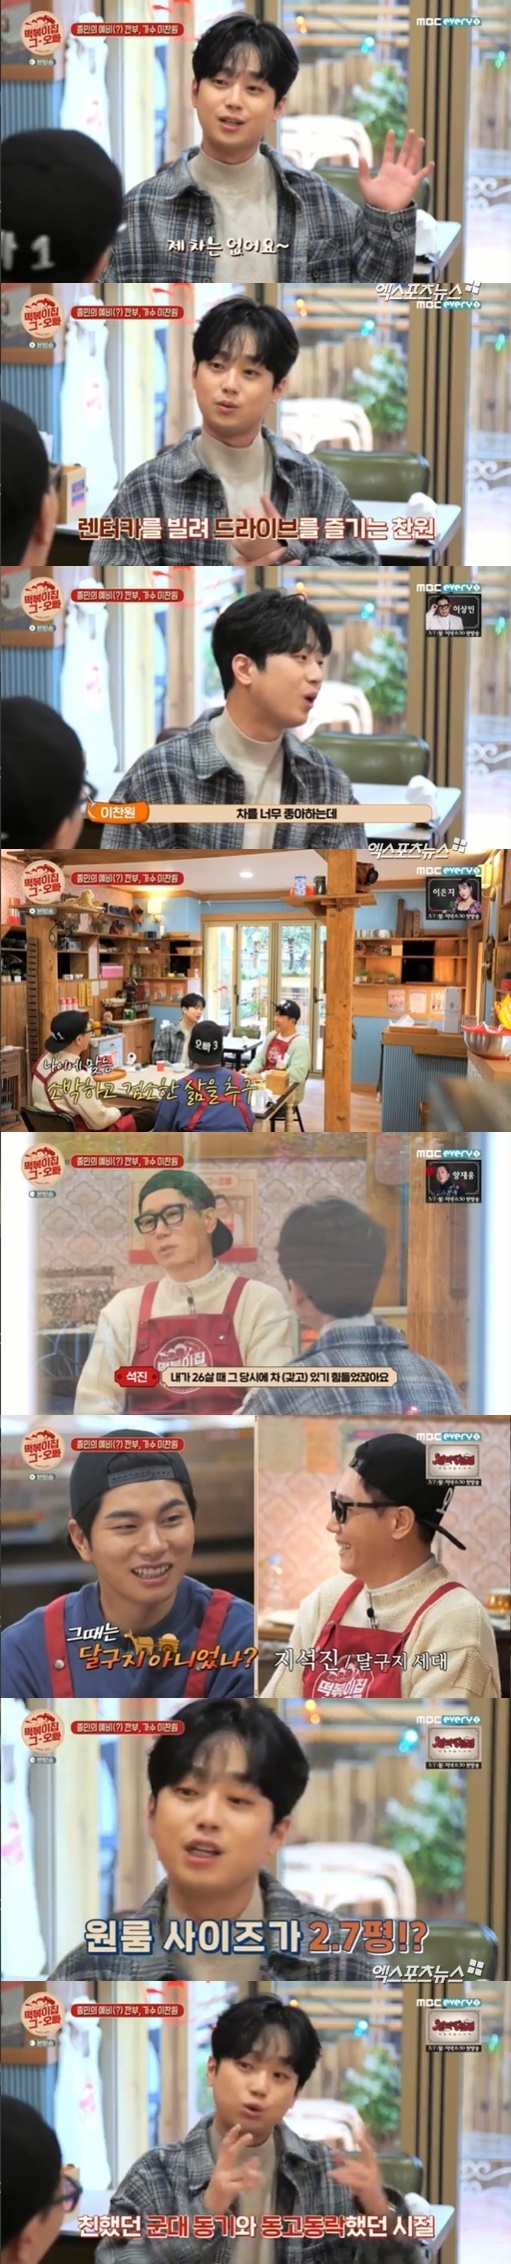 Lee Chan-won, Tteokbokki house brother, has emanated a genuine charm.MBC Everlons Teokbokki house brother, which aired on the 15th, featured actor Lee Dong-hwi, trot singer Lee Chan-won and actor Choi Daniel, who are Ji Suk-jin, Kim Jong-min and Lee Yi-kyungs Kanbu.The second guest was Lee Chan-won, a Korean-style Korean-style Korean-style Korean-style Korean-style Korean-style Korean-style Korean-style Korean-style Korean-style Korean-style Korean-style Korean-style Korean-style Korean-style Korean-style Korean-style Korean-style Korean-style Korean-style Korean-style Korean-style Korean-style Korean-style Korean-style Korean-style Korean-style Korean-style Korean-Lee Chan-won said that he first asked Kim Jong-min, a candy at the time of filming Pongpong A School. He has only made his debut for three years.With luck, I broadcast a lot, and (Kang) Hodong is playing pro like his brother and (Shin) Dong-yeop is playing pro like his brother.I had the idea that I wanted to get too close to Jongmins brother, and I always wanted to entertain at Interview.I respect your seniors, who are comedy, too. Ji Suk-jin then quipped, saying, Its a singer. Lee Chan-won said, Its a singer and an entertainer.It is because of the image that comes out on the air, he said.Kim Jong-min responded, My mom loves it so much; Ive been broadcasting for 20 years and Ive never received an entertainers autograph.Lee Chan-won said, I contacted Kim Jong-min during the KBS Entertainment Awards in 2020 to congratulate him; I called him the day after the live broadcast, but he didnt receive it and there was no Ashley Coleback (?)Kim Jong-mins cell phone had no number; Kim Jong-min was embarrassed by asking Lee Chan-won, Did you change the number?Ive been writing it for 14 years. Soon, Lee said, I dont think I gave you the number. I even gave you a gift on my birthday last year.Kim Jong-min explained, I knew it was stored because it had a name on Tok.Lee is a former president of the school. I have never used a sweat in 12 years.Sports announcers and certified brokers have also been prepared, and Lee Yi-kyung and the limited-time warriors have something in common: The mobilization reserves are over this year.I went right after my first year at 20, she said.Lee Chan-won, who dreams of becoming the next generation MC, said, I dont mean to say that Im actually going to talk constantly and Im going to get the award.I want to go out of I live alone and Point of omniscient meddling. I want to go out of Save me Holmes. Mr.I appeared on Trot.Lee Chan-won said, I have never been to a club. I am 20 years old and I have independence.I was surprised to say that Alba, who has been doing it since I was 20 years old, has done a sundew stew house, a limited restaurant, a fish white house, a steamed chicken house, a meat house, a bar, a hop house, a textile factory, a textile factory, a fish cake factory, a brick factory, a logistics center,Lee said, I have never received my allowance until February 20, because of my independence.(With the money earned by part-time job) It was 670,000 won that I spent my tuition, spent my living expenses, and spent my savings in the military.With this money, I went up to Seoul and lived on the Friend house and went to Mr. Trot. I also confessed my first hidden debut anecdote.I had to pay for my living and transportation and I had to pay for my costumes, so I spent all my money in three months. I had a lot of costumes.Before the show Jintobagi was broadcast on Trot, I called my mom before James Stewart, and she was surprised to ask me to borrow only 2 million won.I have never opened my hands in years, and I have not been able to broadcast yet, so what do you want to do at Seoul?The first broadcast behind James Stewart was Mr. Trot and said he would pay it ten times. The reaction came after James Stewart. I did not even talk to my father. He was too open. My uncle prepared an actor and my father prepared a song, but it was too expensive.He said he wanted to live a normal life. I came up to Seoul and told him to come well.He said he thought he would decide and take responsibility in his mid-20s. He is now the first fan. Asked if he had time to meet Friend, he said: I still meet the Shymsham Friends, I really like meeting people. I drink and drive. Theres no car.I rent a rental car. I like driving and riding so much, but I am refraining from being cool when I buy at a young age. On the other hand, Ji Suk-jin admired Lee Chan-wons mind, saying, When I was 26, it was hard to have a car at that time, but I bought a car because I was looking good.Before becoming a singer, I met friends who were close friends. Lee Chan Won said, Homefriends have also been playing at my Seoul house a lot.The first house I had come to Seoul was a house of military motives, but I lived in it. It was 2.7 pyeong.He is said to have changed among the Friends as he became a star with Mr. Trot.The time zone for shooting is not at all right with the workers because of the nature of the job, and it is often taken during the day and ended at dawn.I cant play Ashley Coleback then, so I have to do it the next day, but if I shoot it in a row, I forget it.If there is a person who is doing Misunderstood like that, do not be Misunderstood and tell me to leave a message. Photo: MBC Everly Ones screen